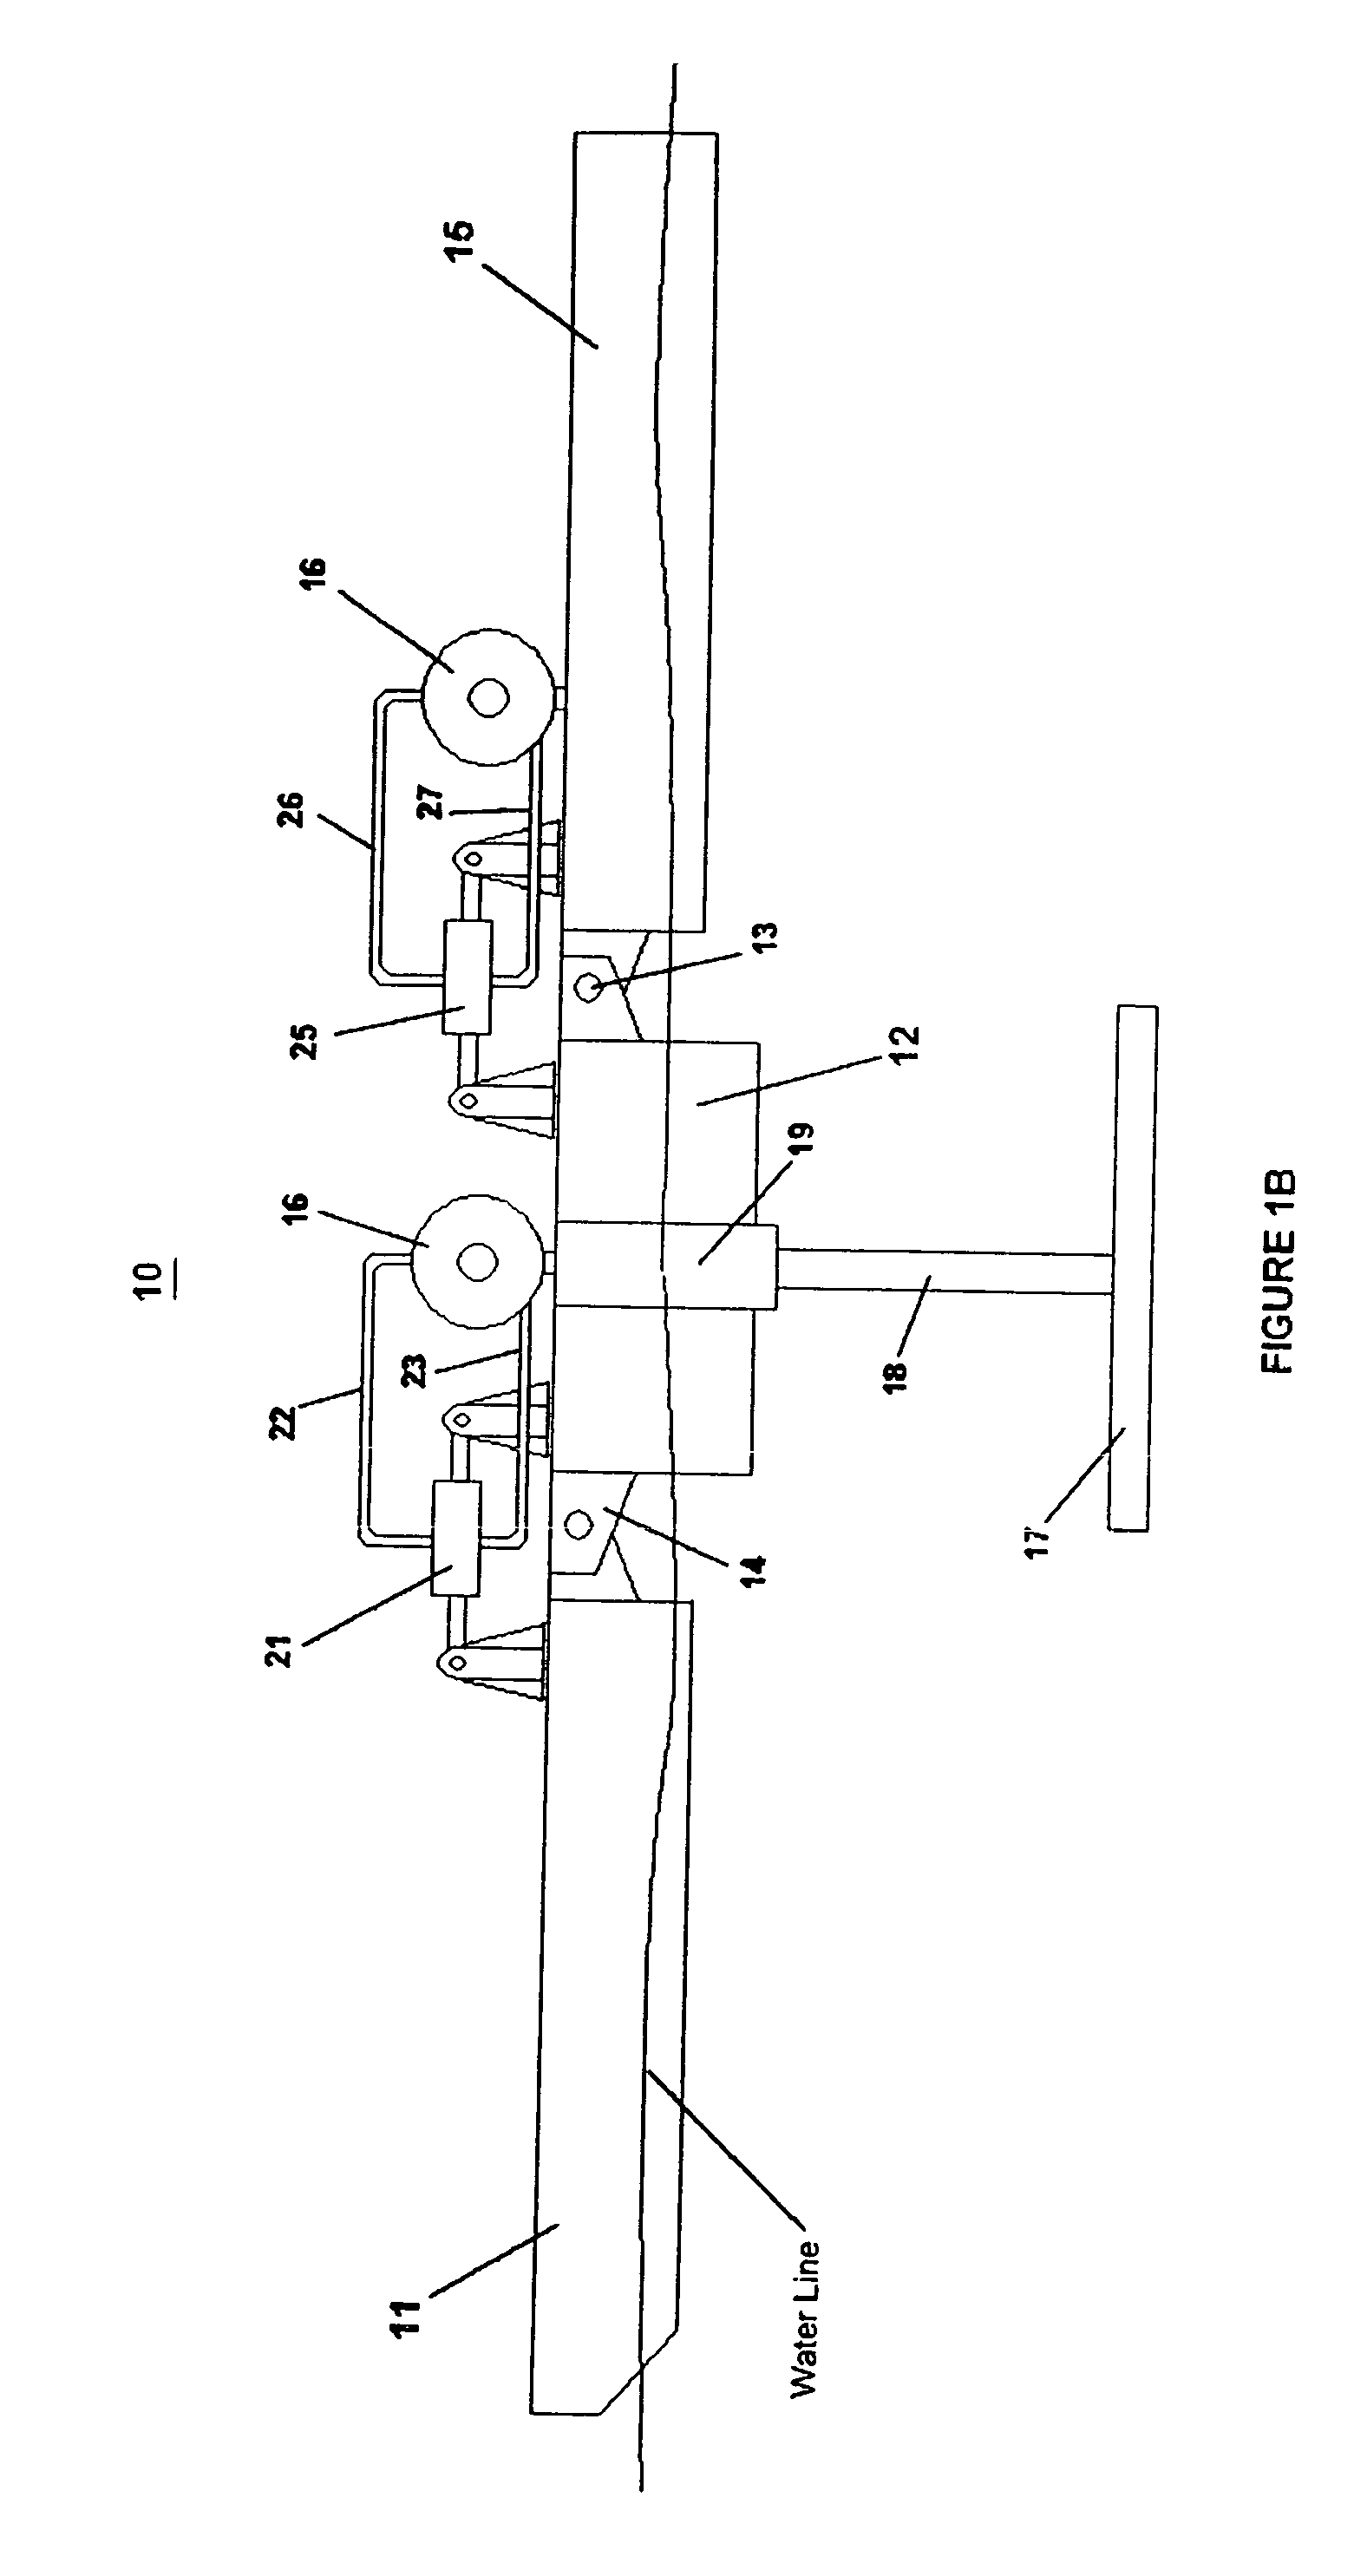 System and method for renewable electrical power production using wave energy